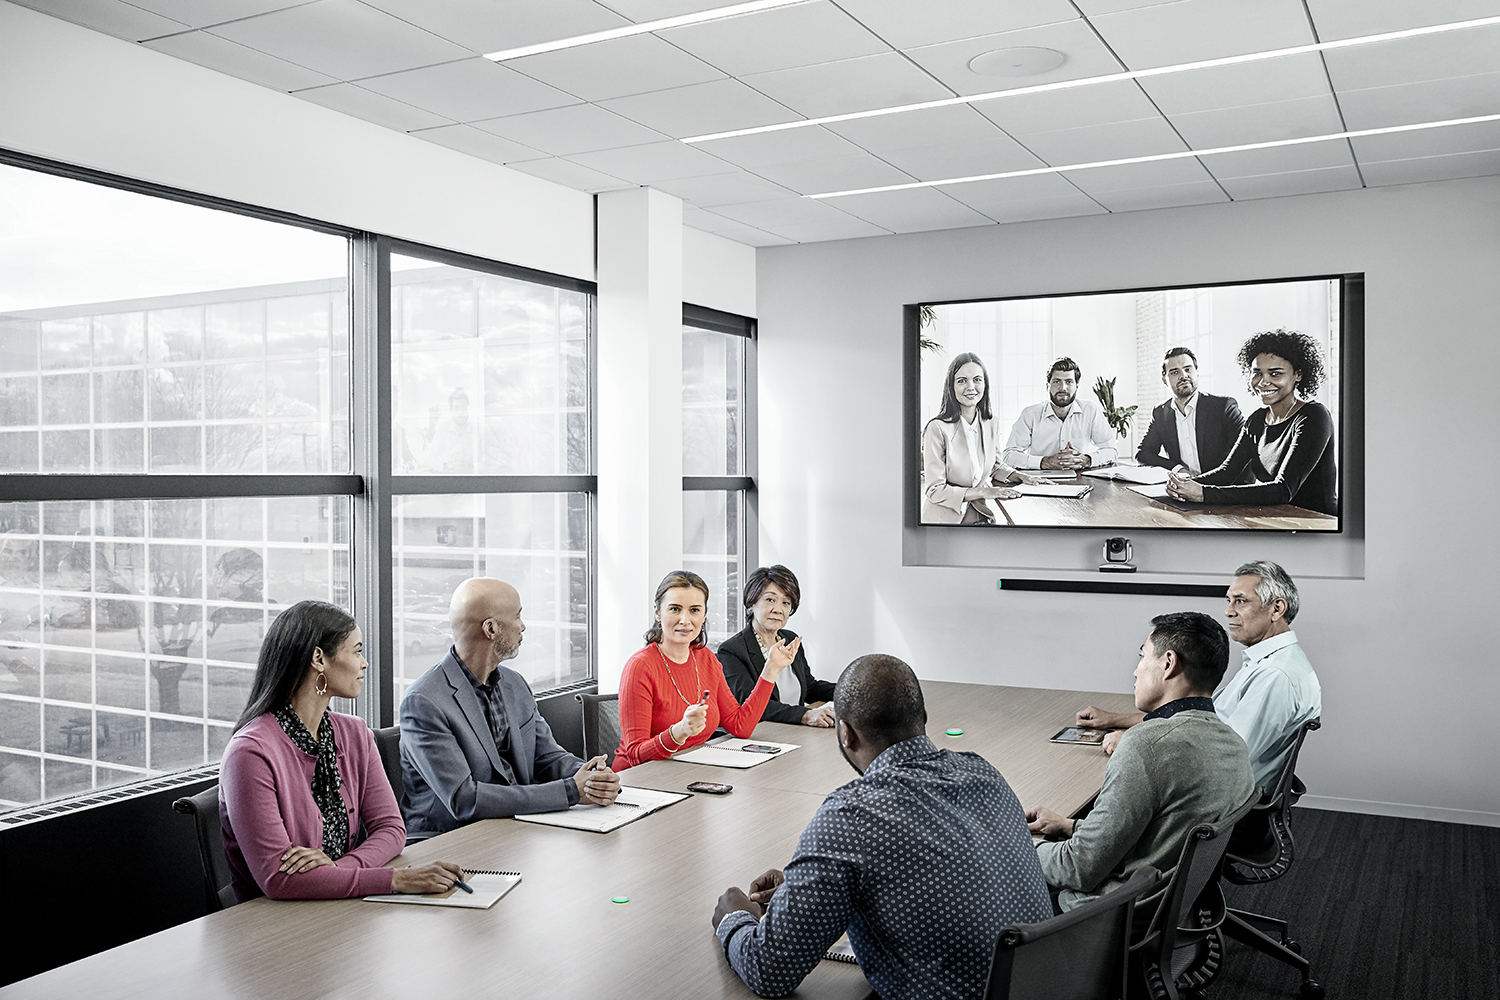 Shure Now Provides A Complete Conferencing Audio Ecosystem For Every Type of Collaboration Space